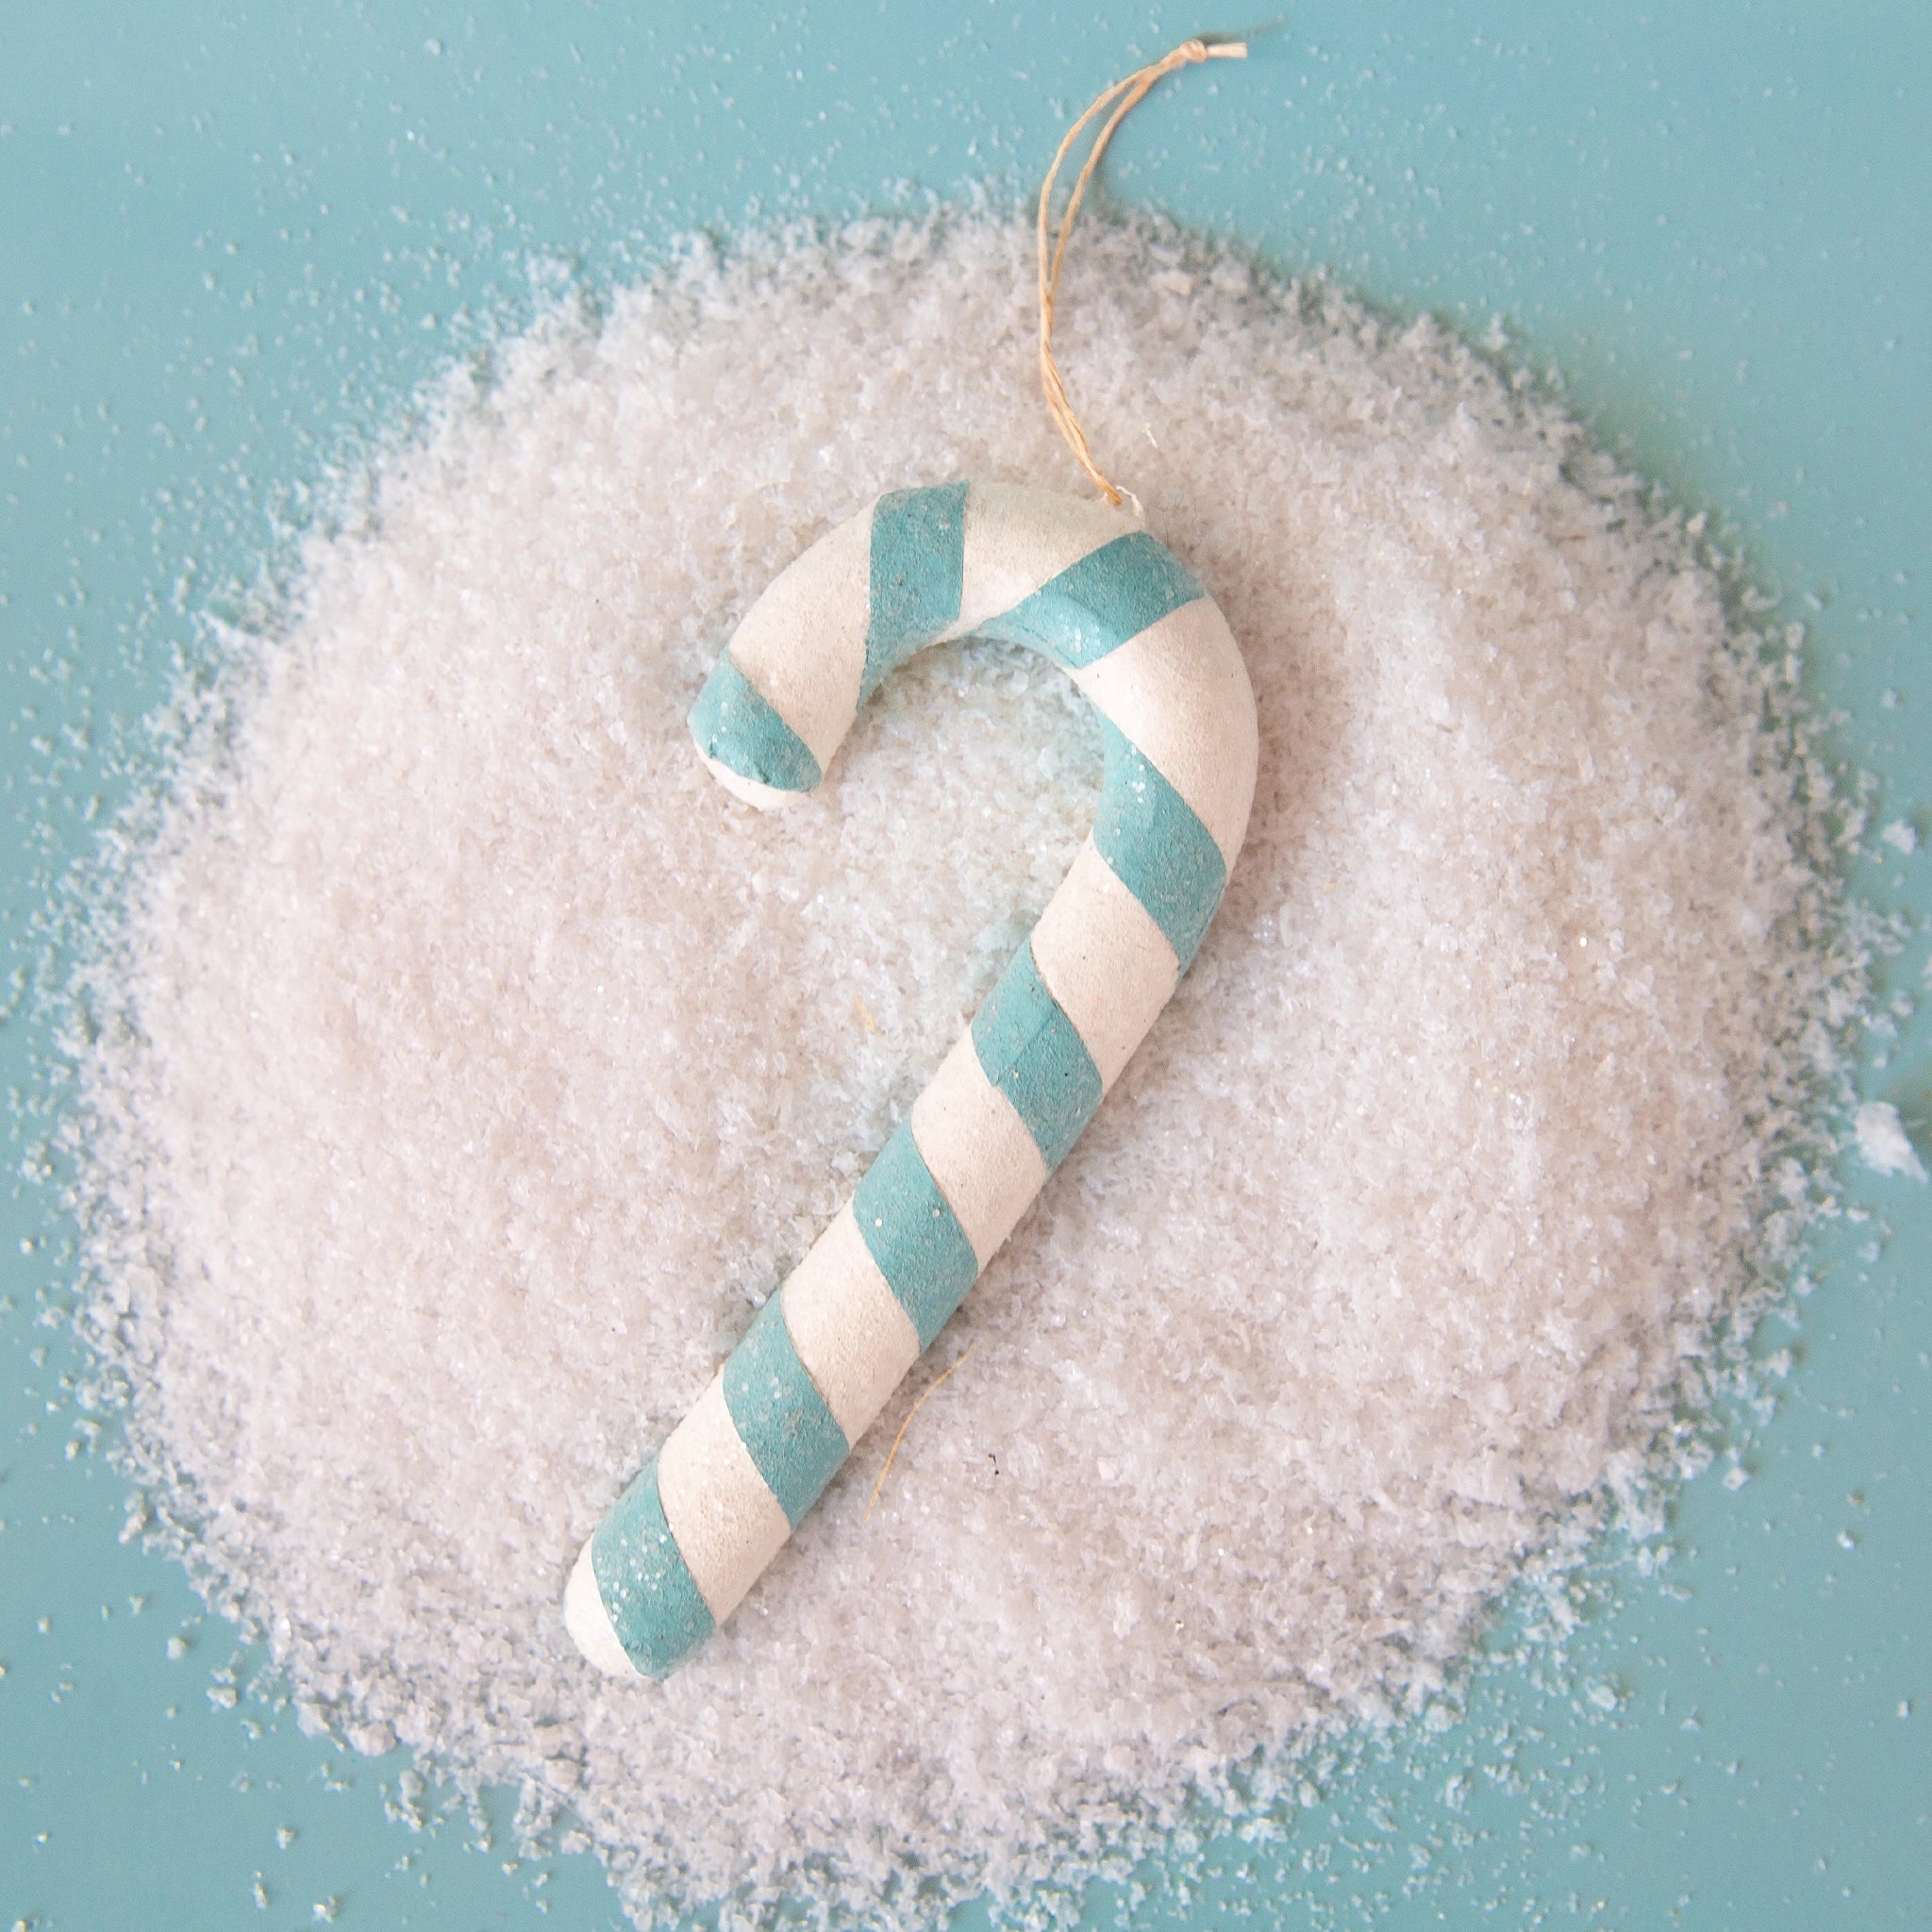 On a blue snowy background is a aqua blue and white striped candy cane ornament. 